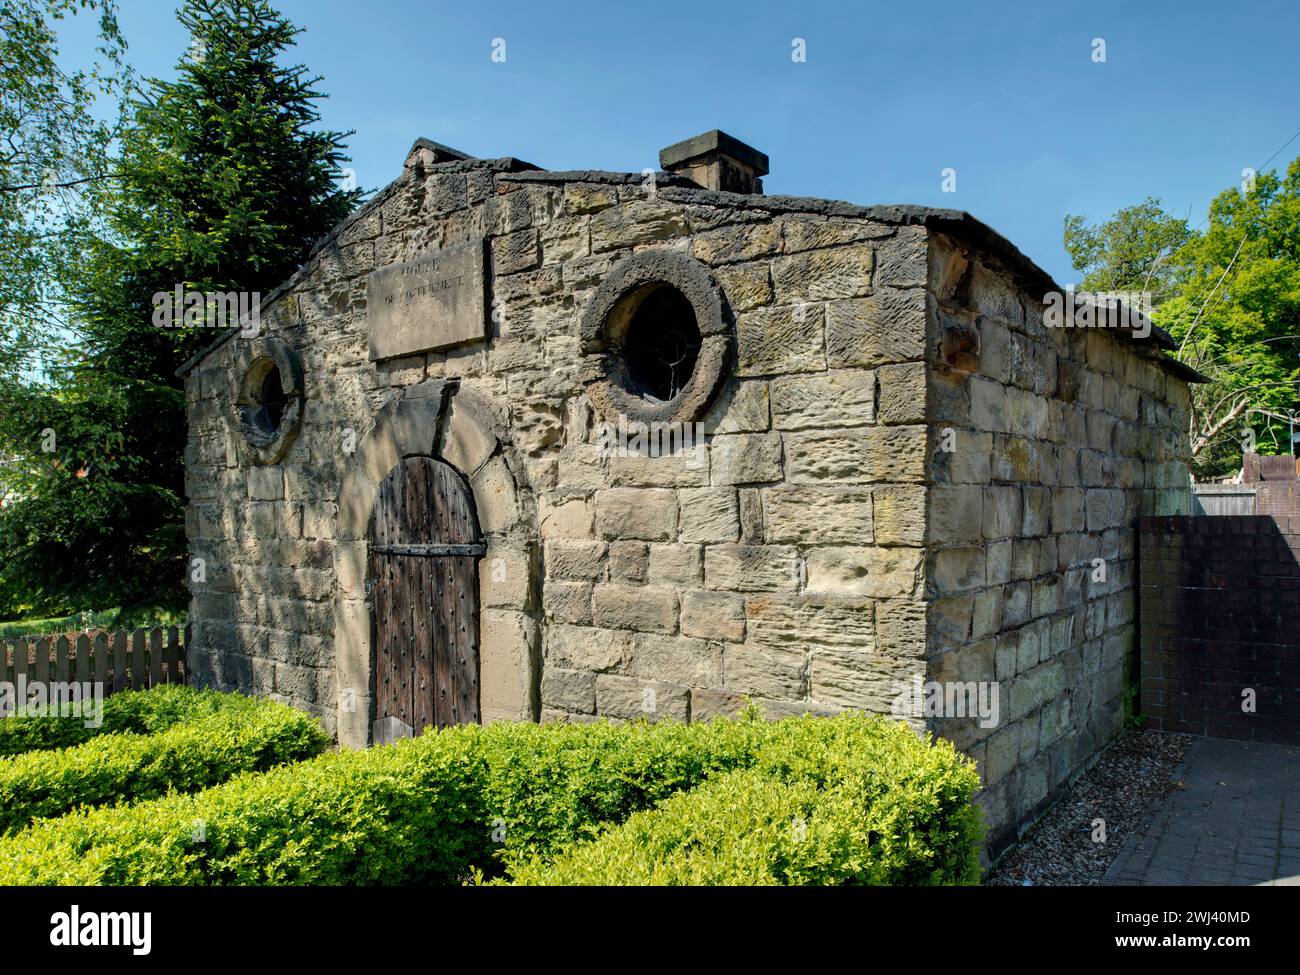 Village lock-ups.  Alfreton, Derbyshire, built in 1820, with 2 cells and known as 'The House of Confinement' Stock Photo